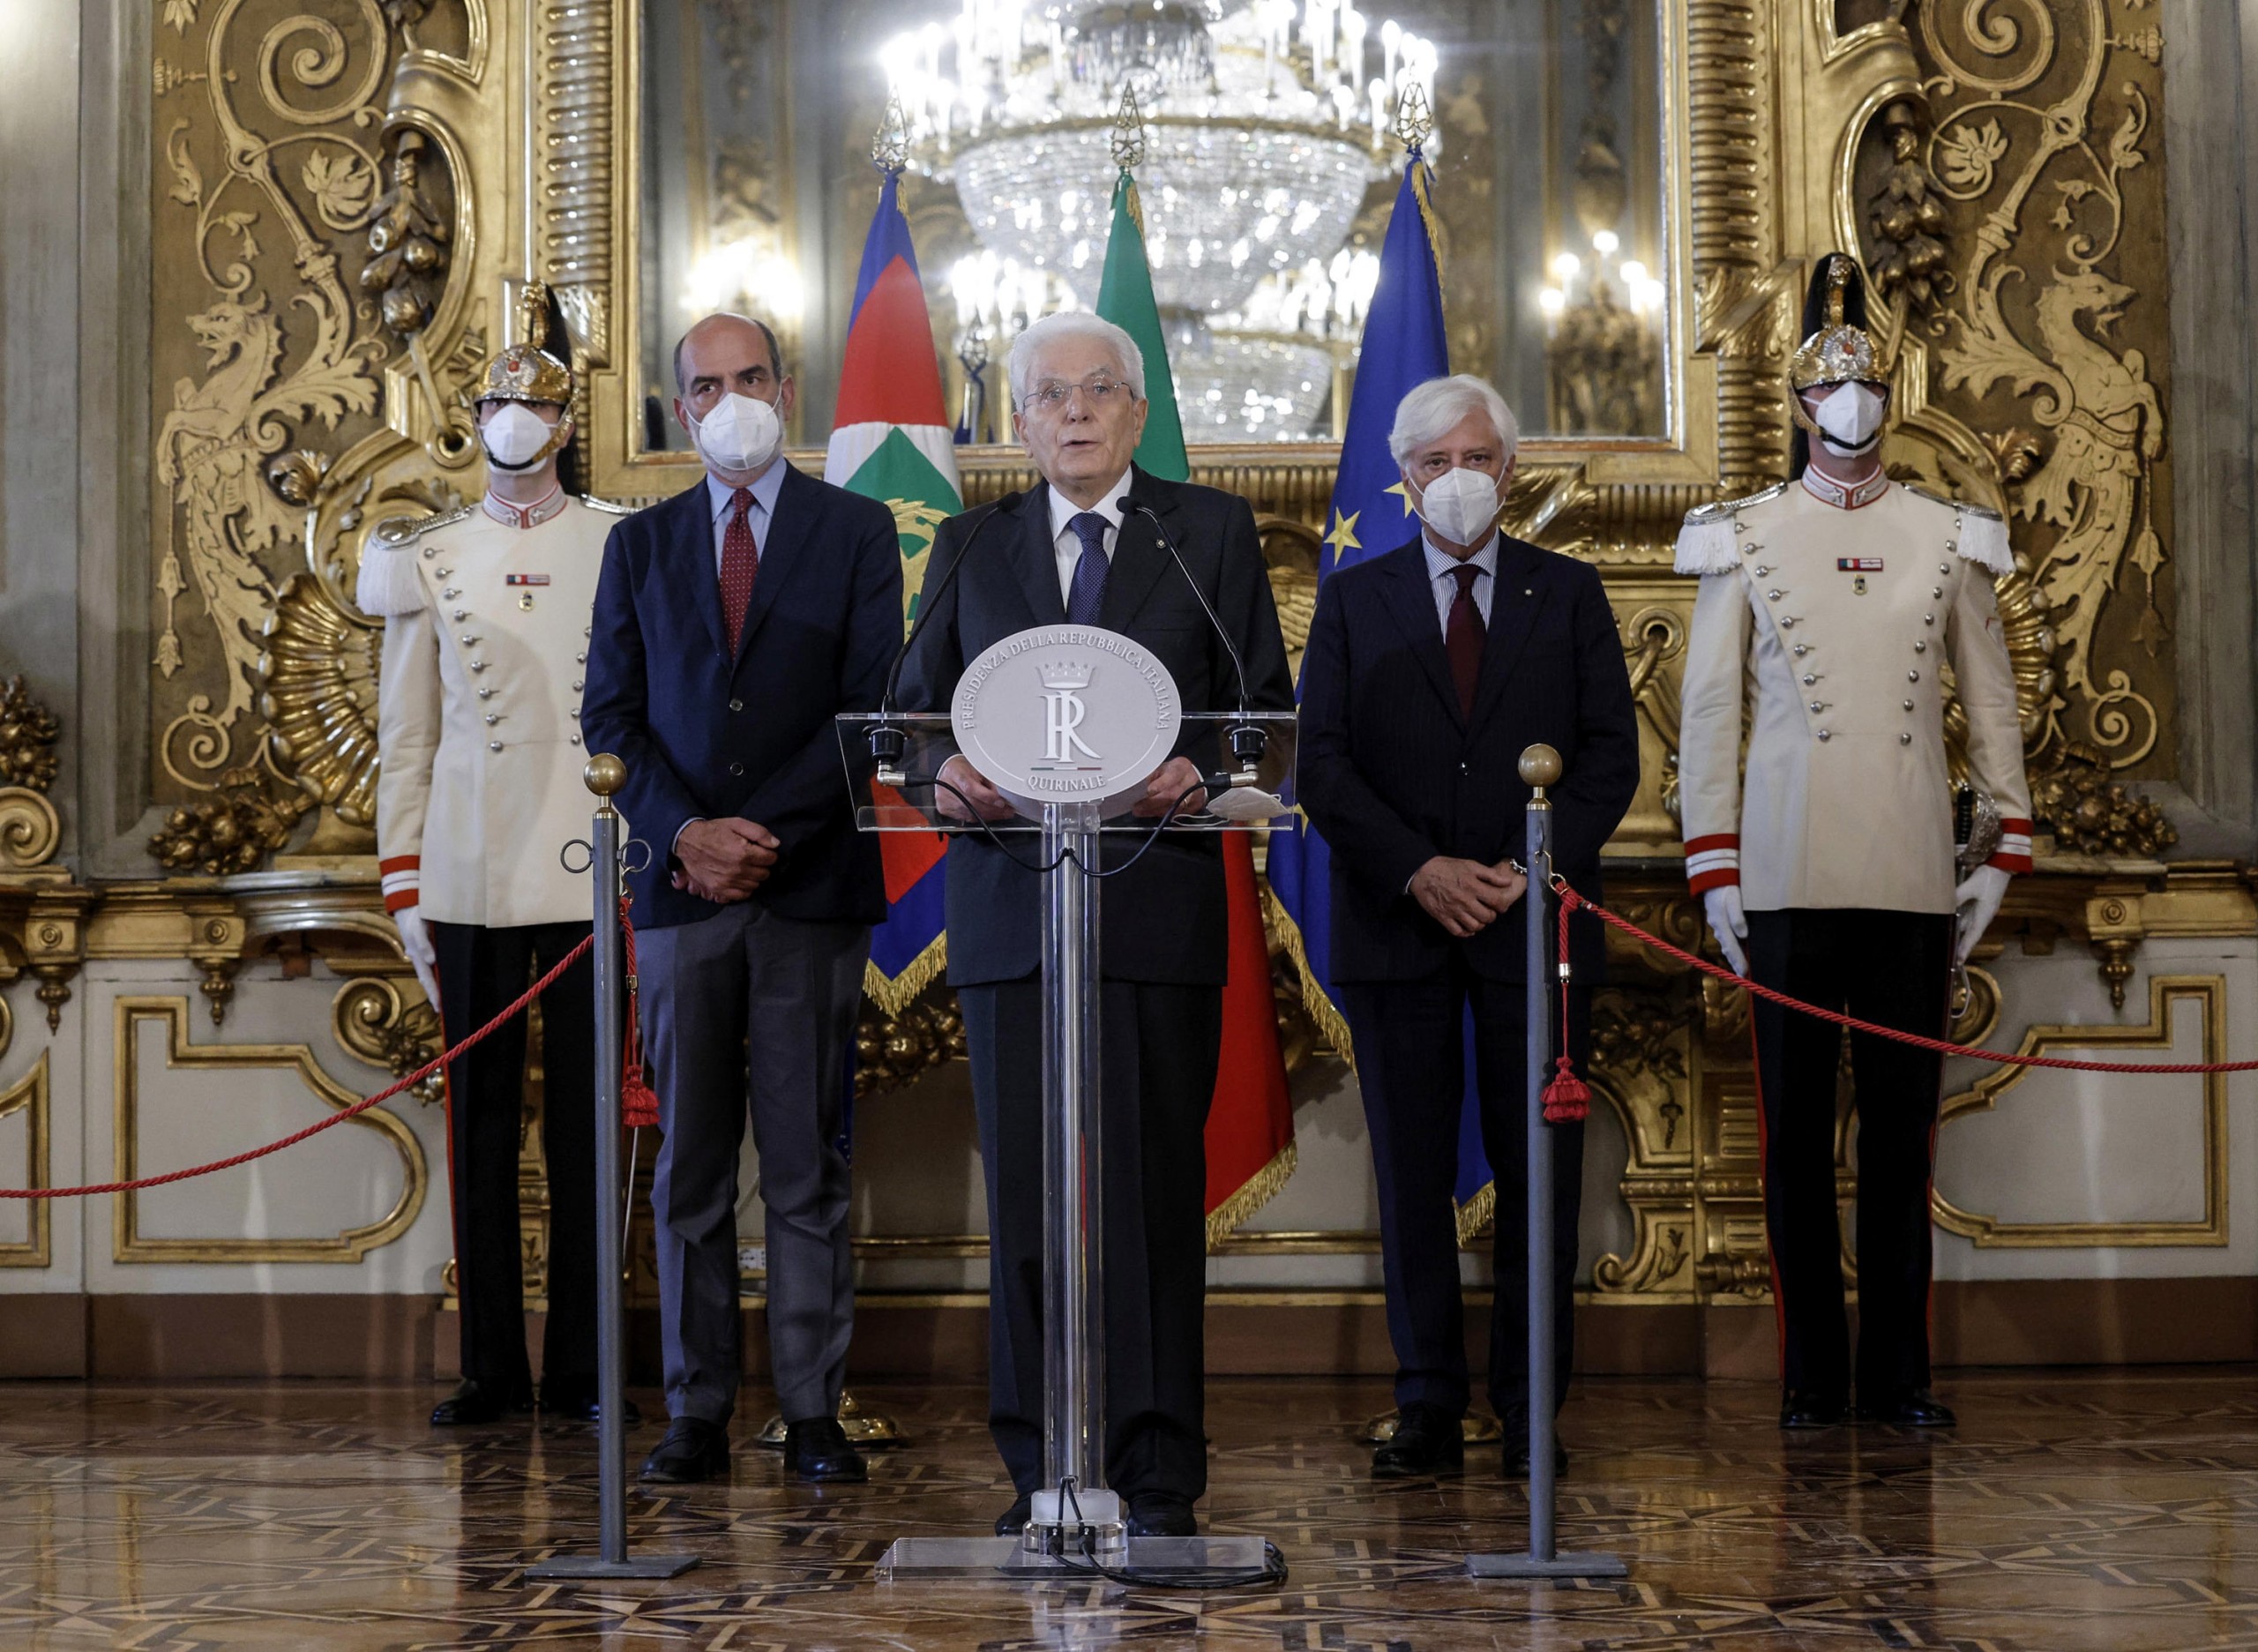 epa10084571 Italian President Sergio Mattarella (C) delivers an address at the Quirinal Palace in Rome, Italy, 21 July 2022, announcing that he signed a decree to dissolve parliament for a general election to be held within 70 days after Prime Minister Draghi resigned following the collapse of his ruling coalition.  EPA/GIUSEPPE LAMI